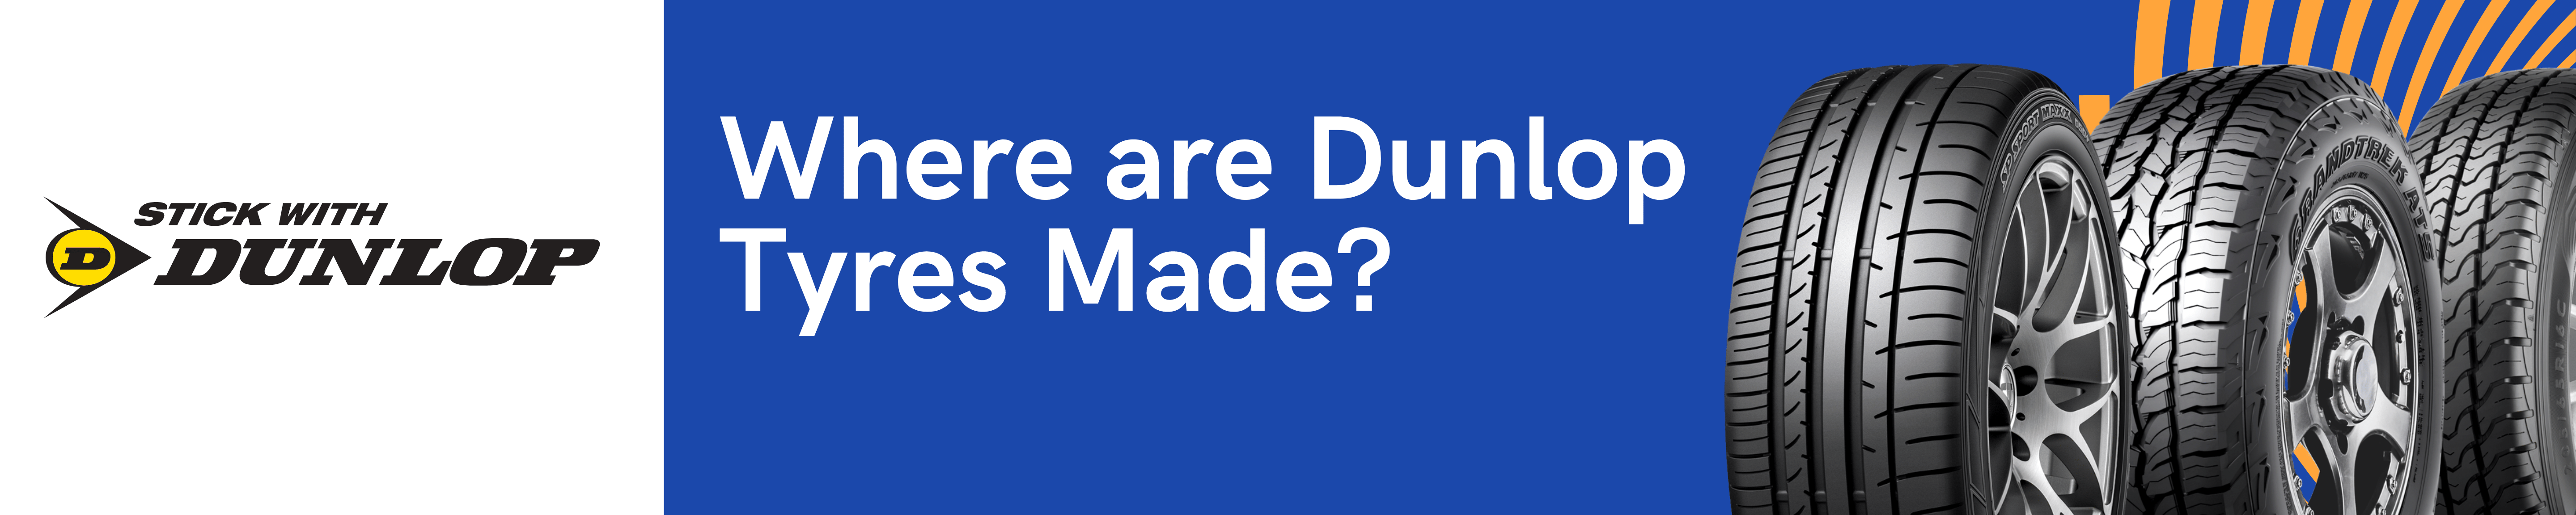 Where are Dunlop Tyres Made?